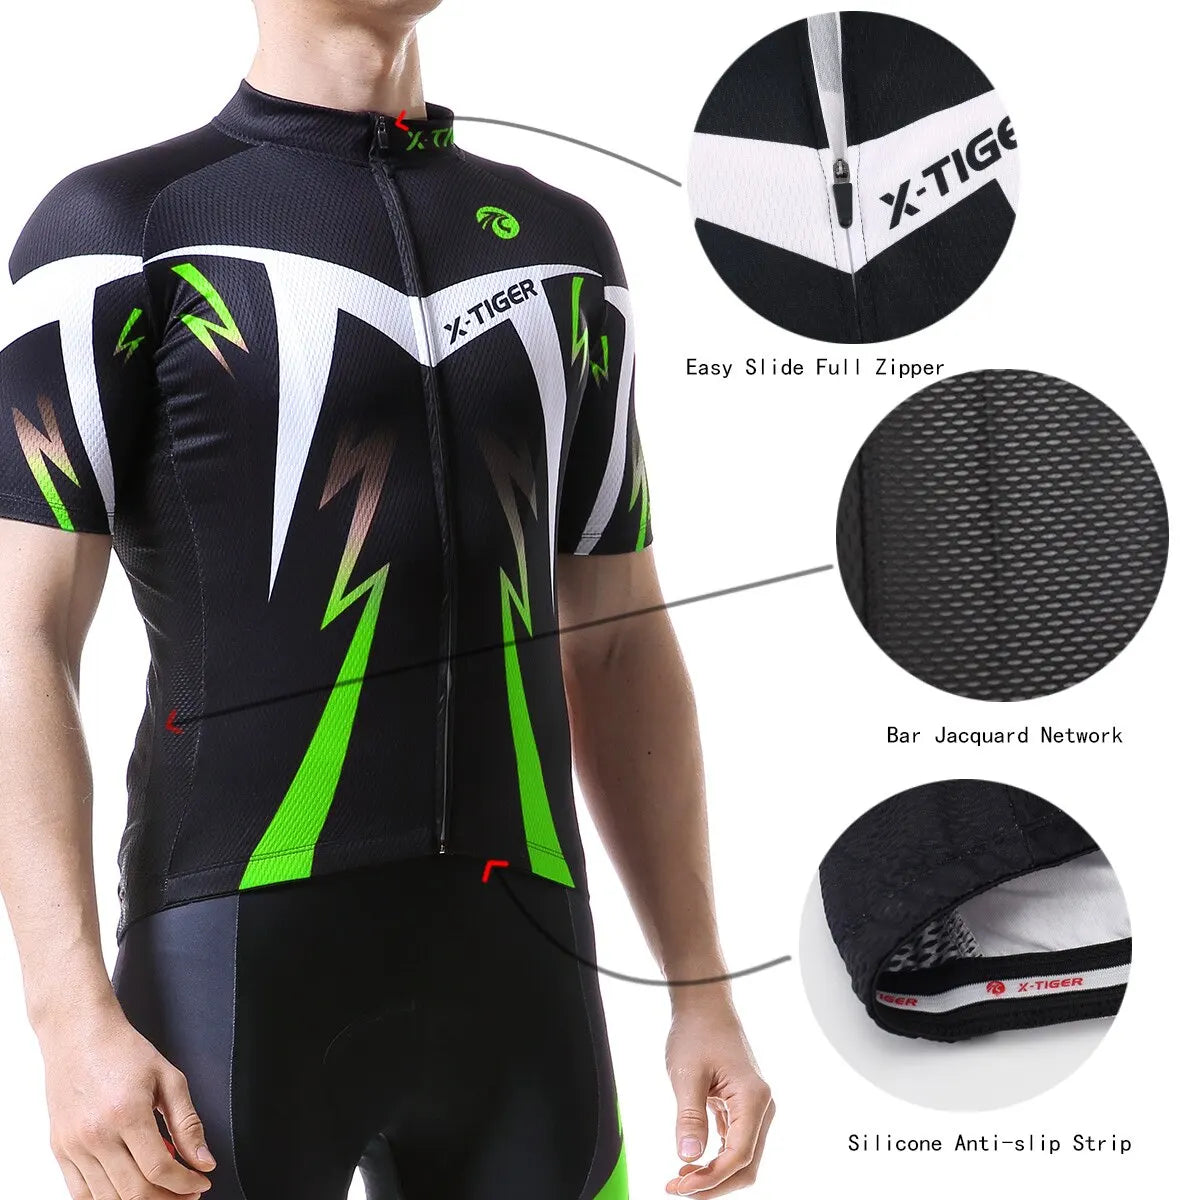 X-TIGER Pro Cycling Jersey Set Men Bicycle Clothing MTB Summer Quick-dry Bike Riding Clothes Anti-UV Suit Accessories